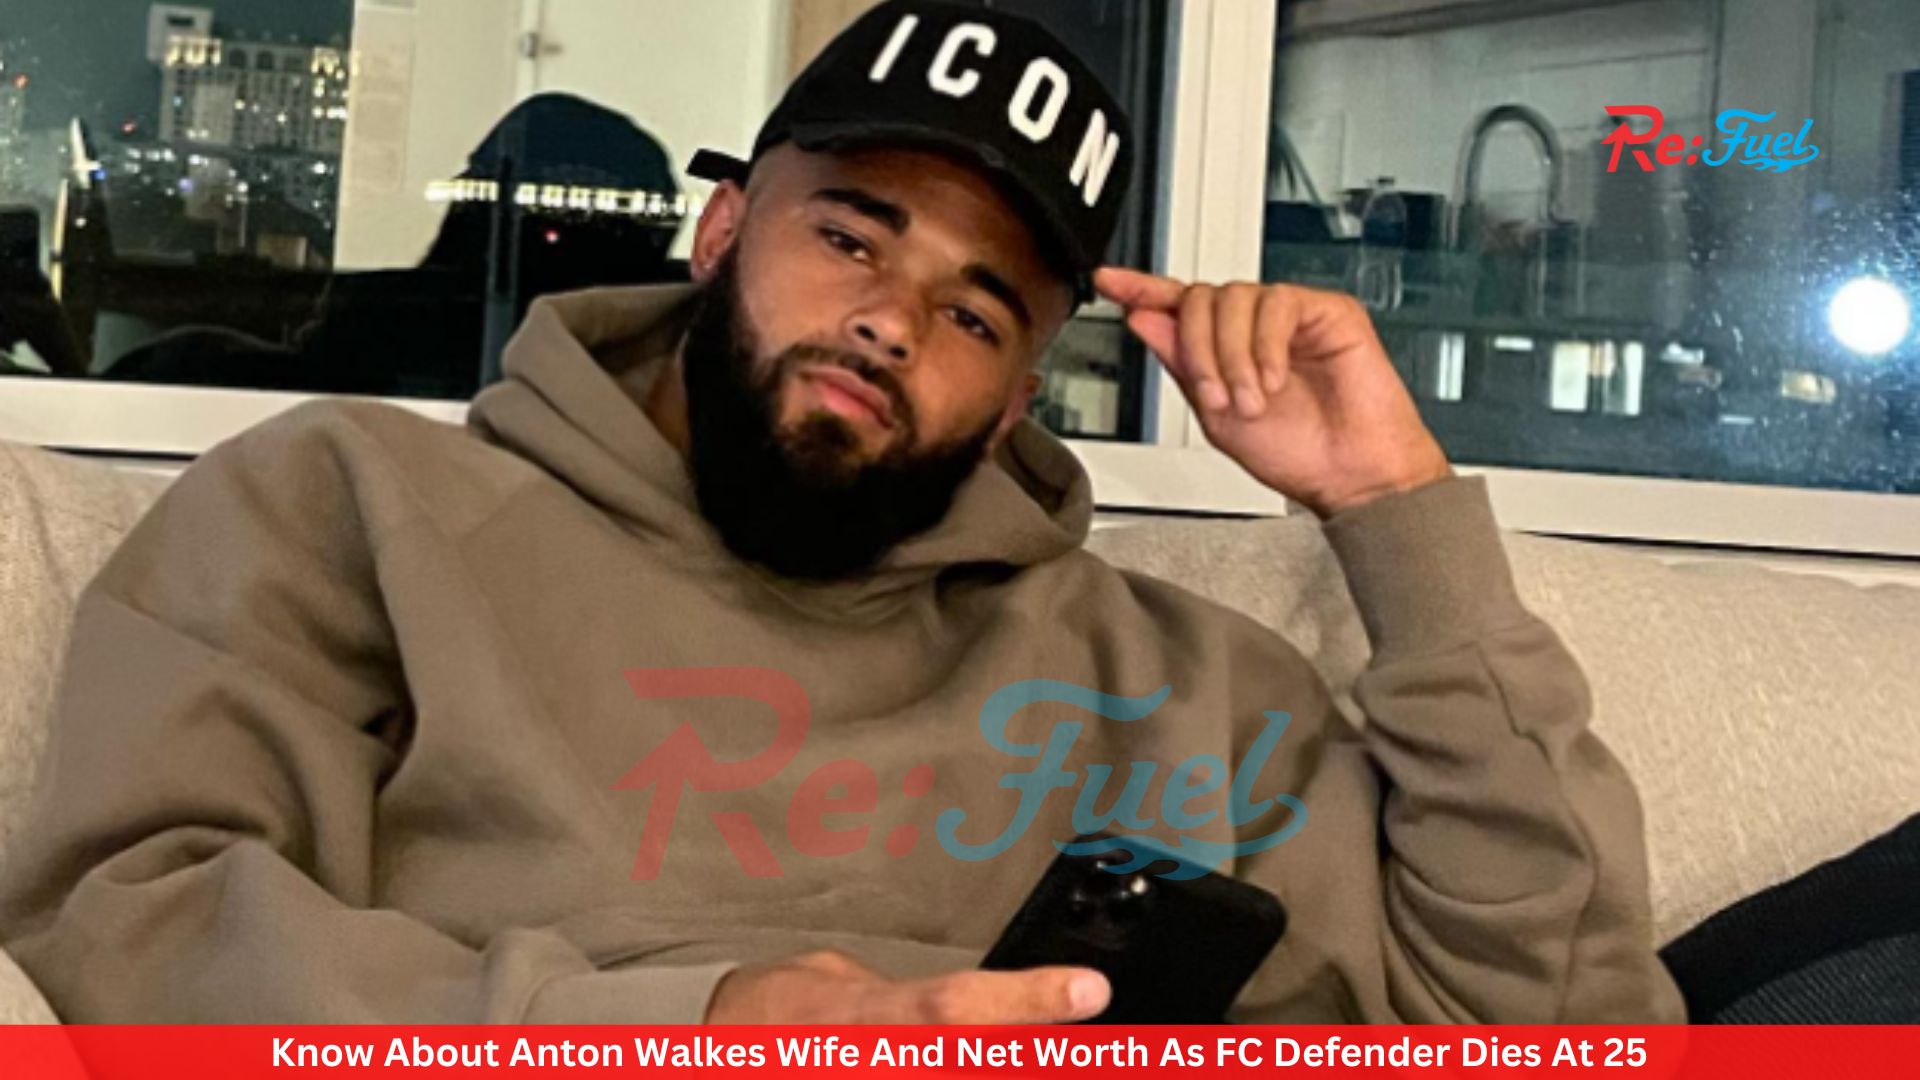 Know About Anton Walkes Wife And Net Worth As FC Defender Dies At 25